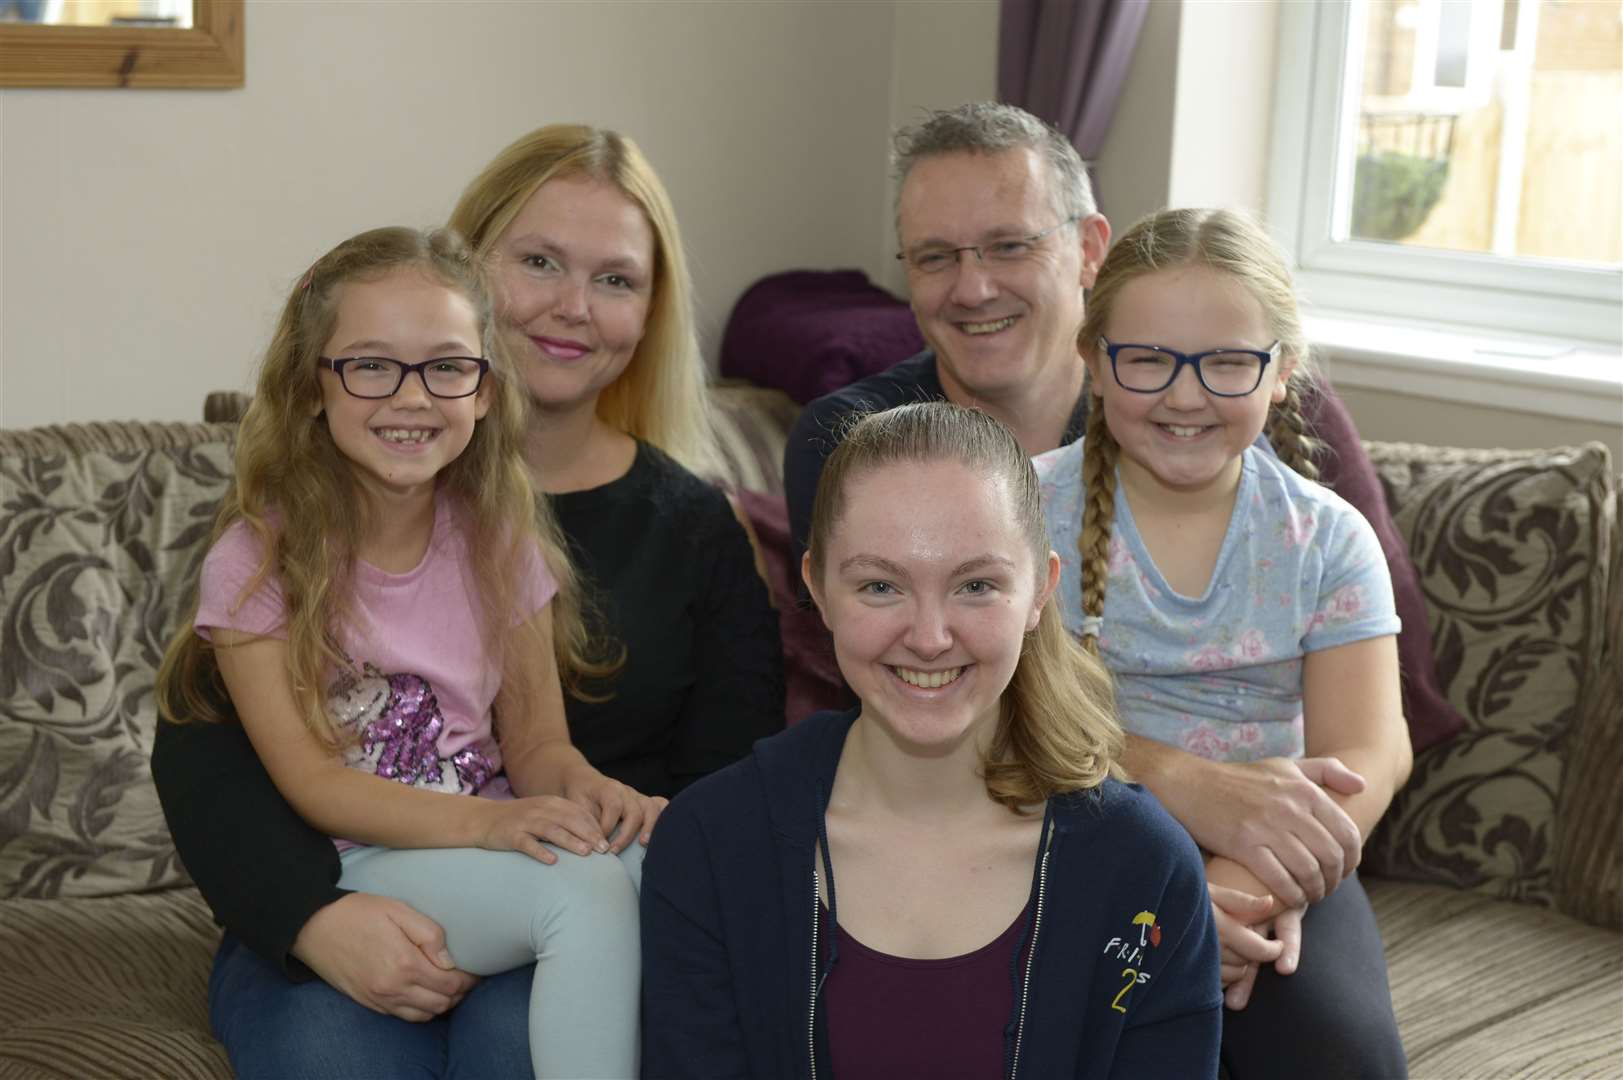 Young Fundraiser Morgan Wright, 16. Pictured here with her mum Kelly, dad Paul and sisters Lottie and Phoebe.